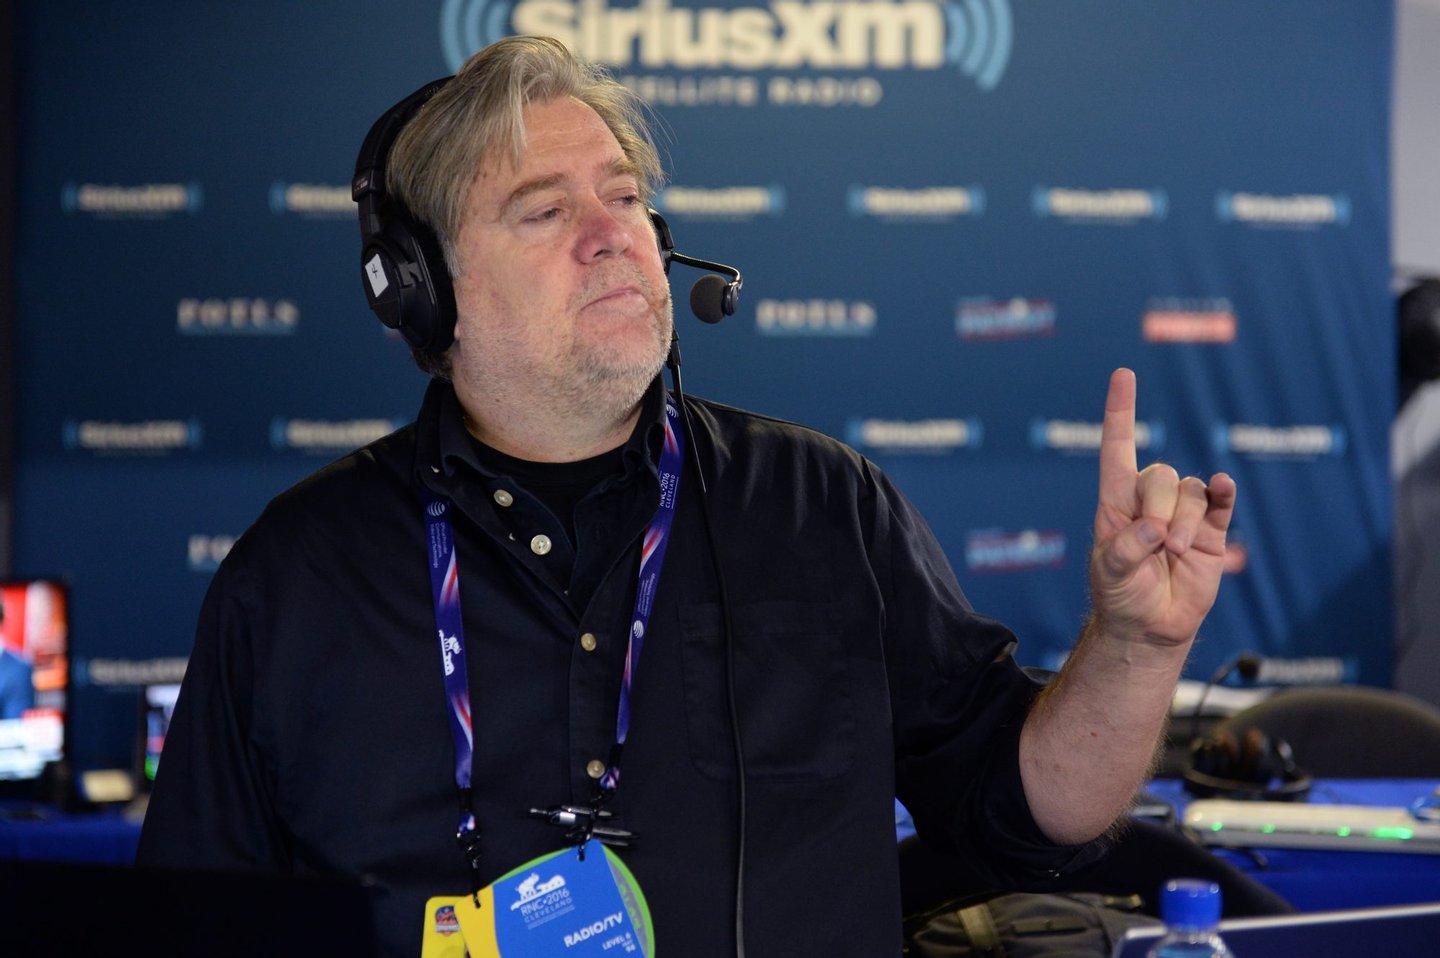 CLEVELAND, OH - JULY 21: Stephen K. Bannon responds to a caller while hosting Brietbart News Daily on SiriusXM Patriot at Quicken Loans Arena on July 21, 2016 in Cleveland, Ohio. (Photo by Ben Jackson/Getty Images for SiriusXM) Stephen K. Bannon